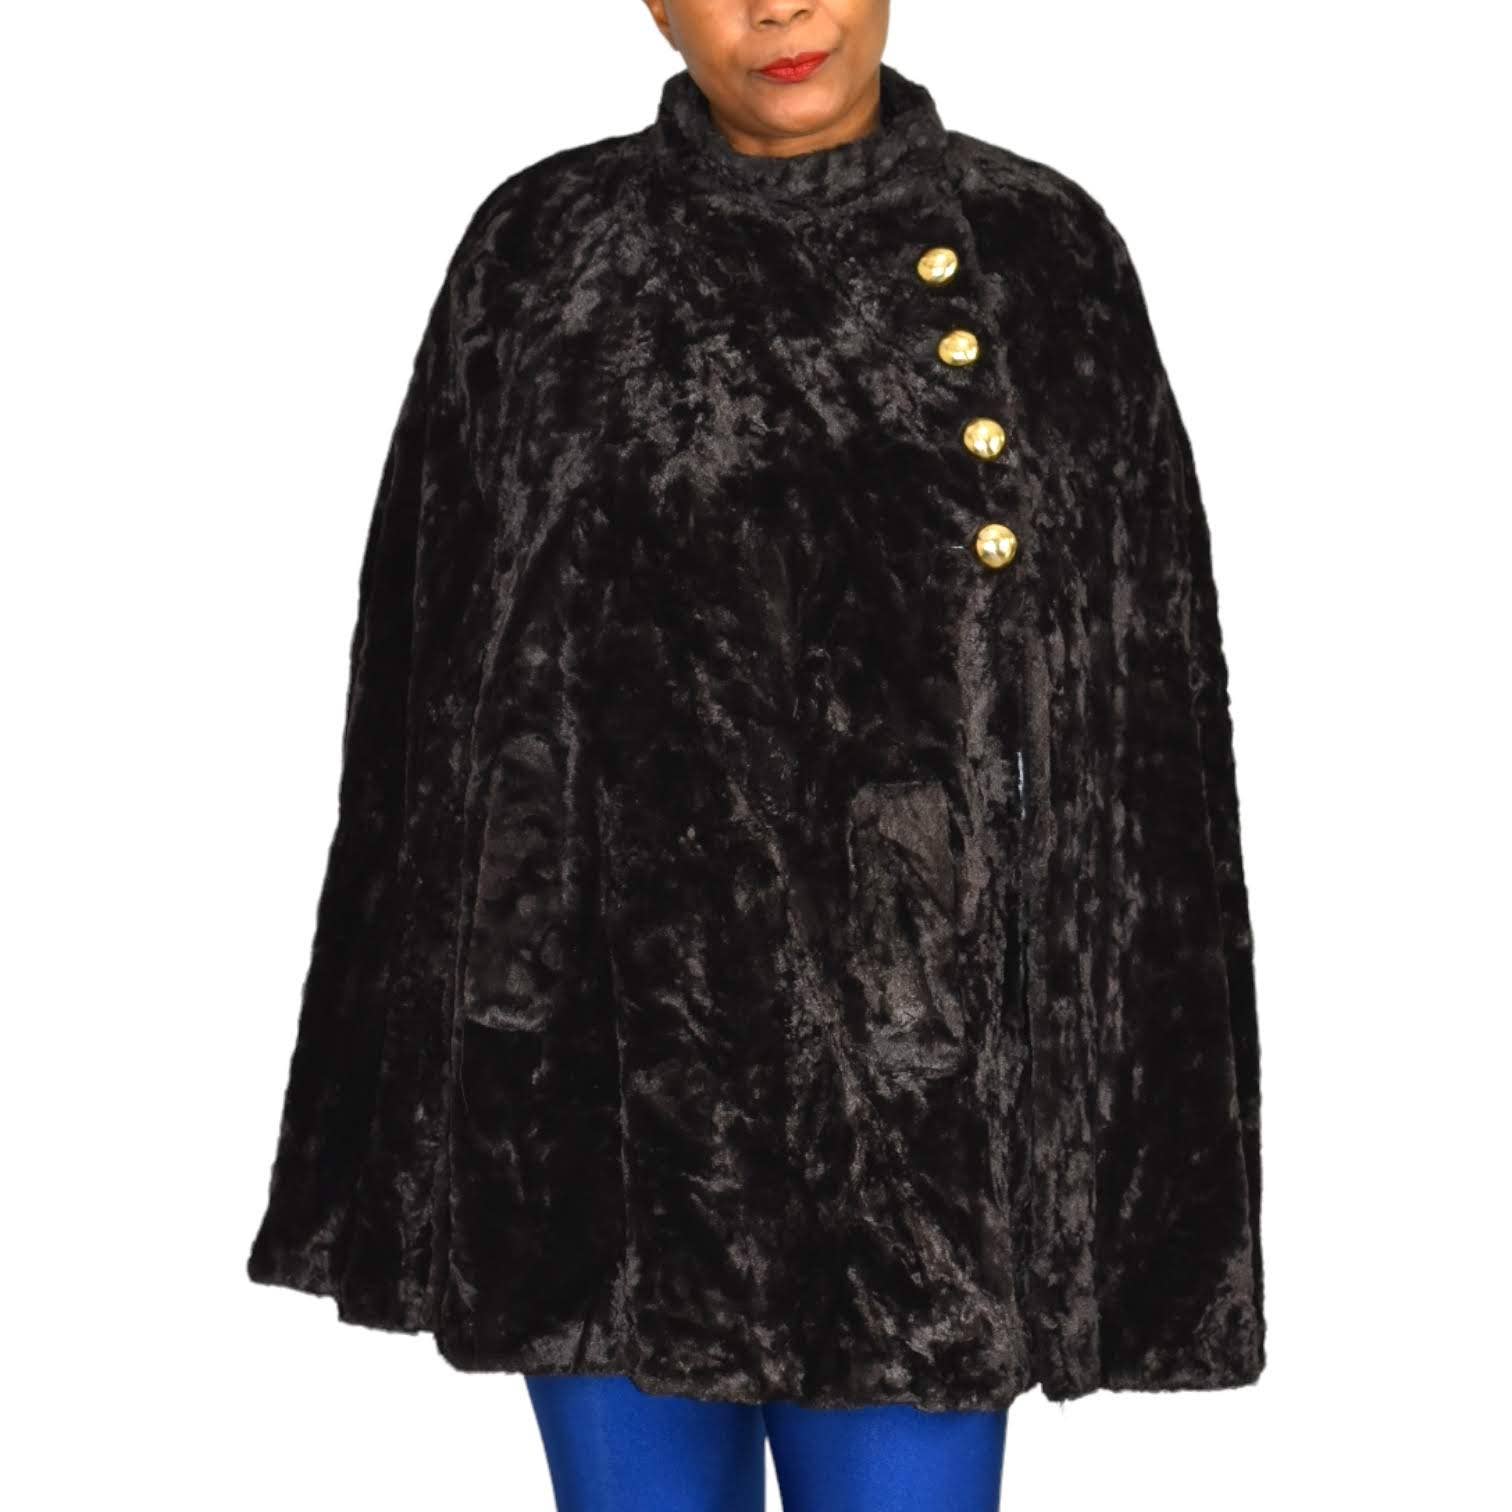 Vintage Faux Fur Cape Synthetic Dark Brown Crushed Velvet Pockets ILGWU Size Small